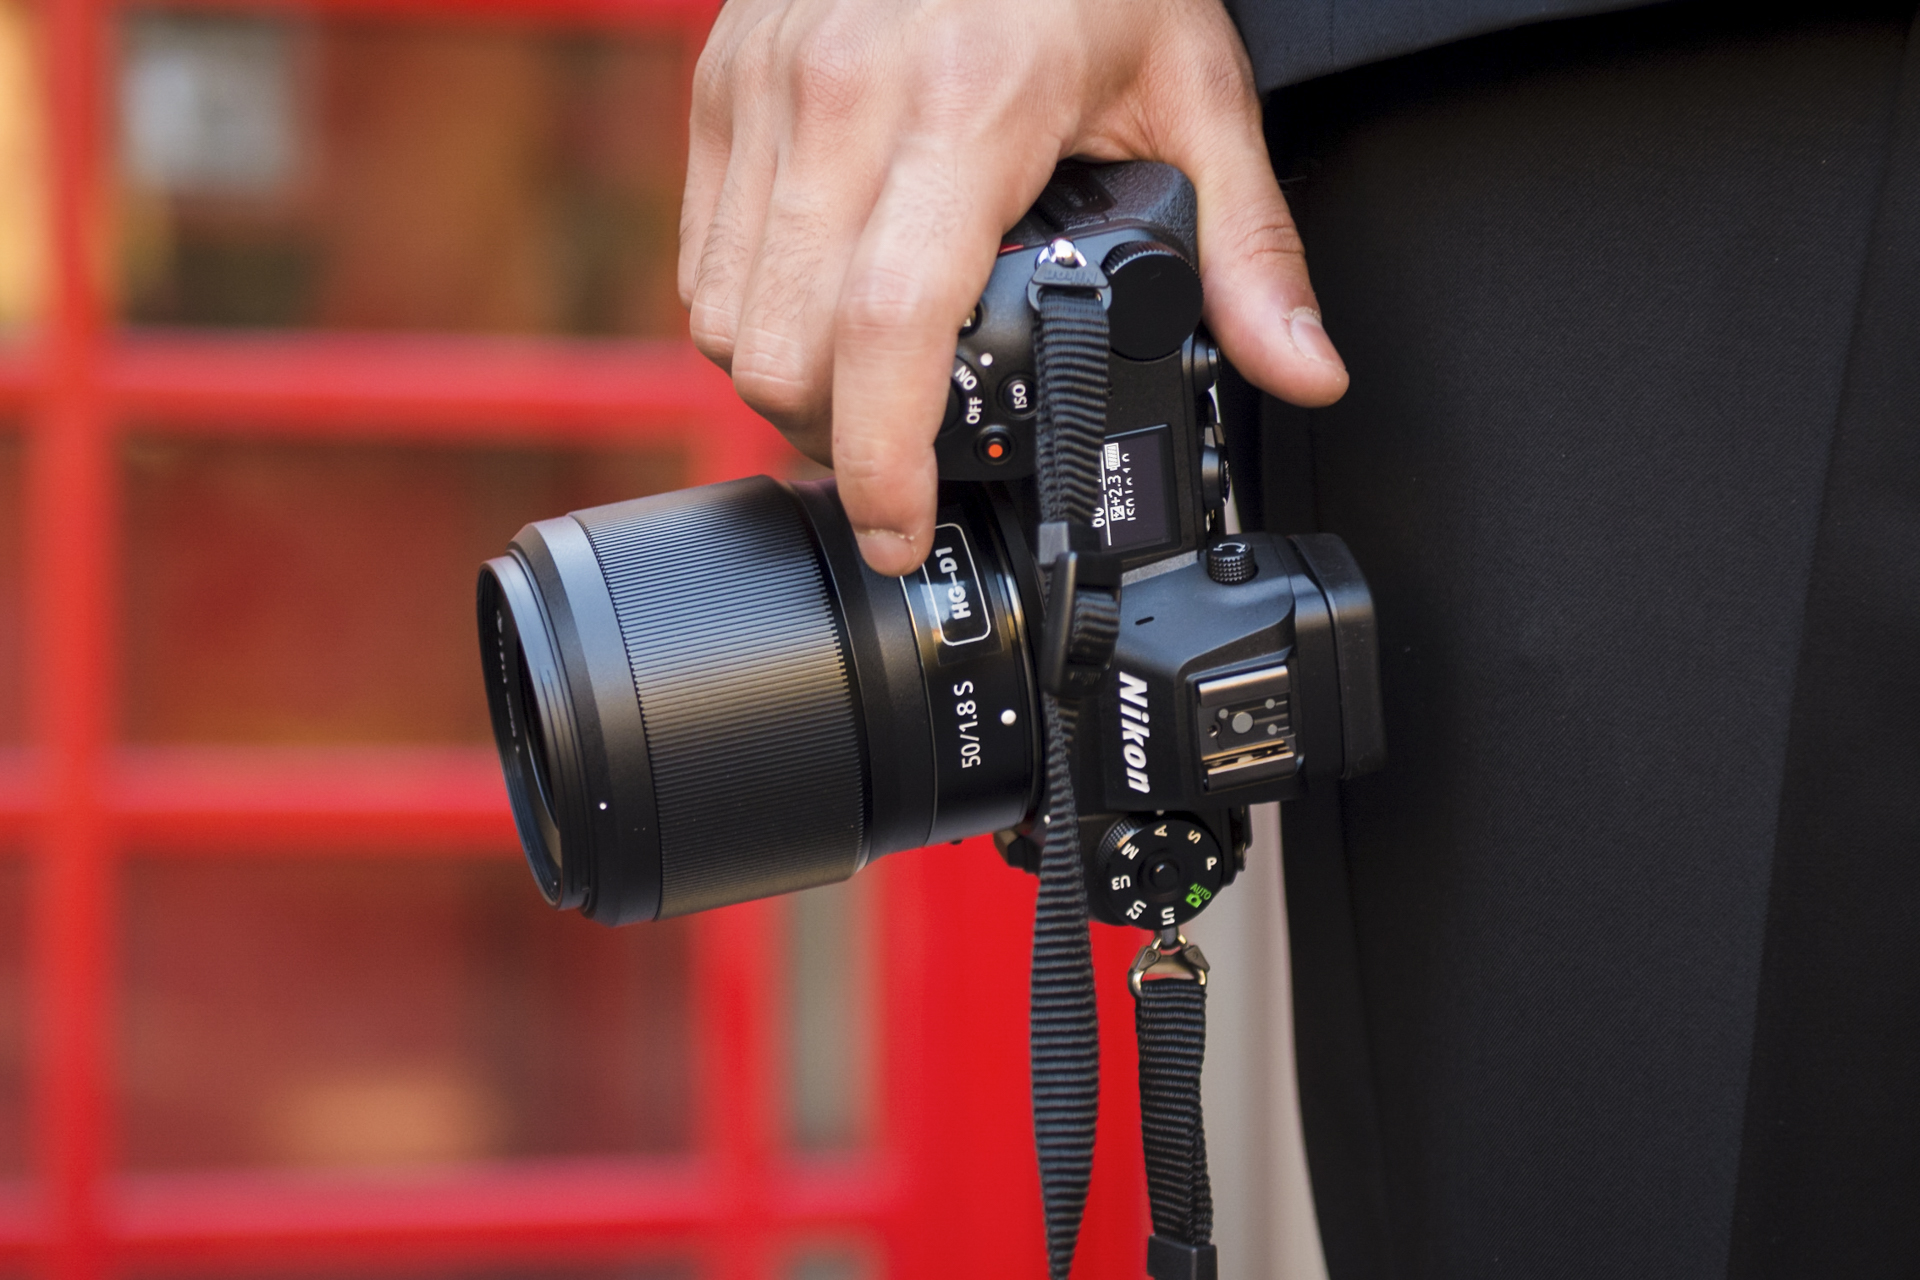 Sony A7S III Hands-on: Confessions of Devout Panasonic User